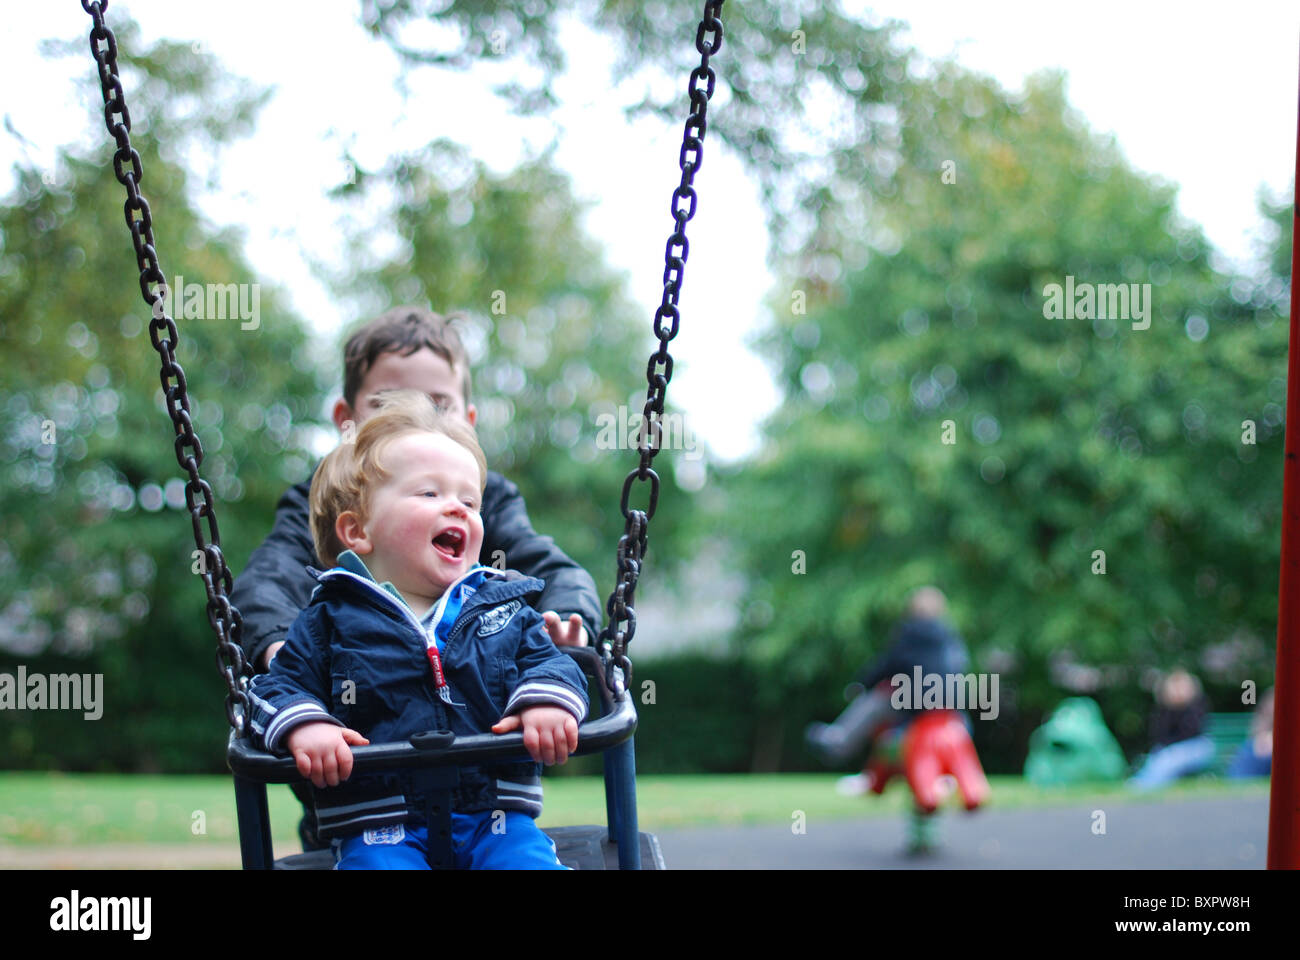 Child pushing another child on a swing Stock Photo